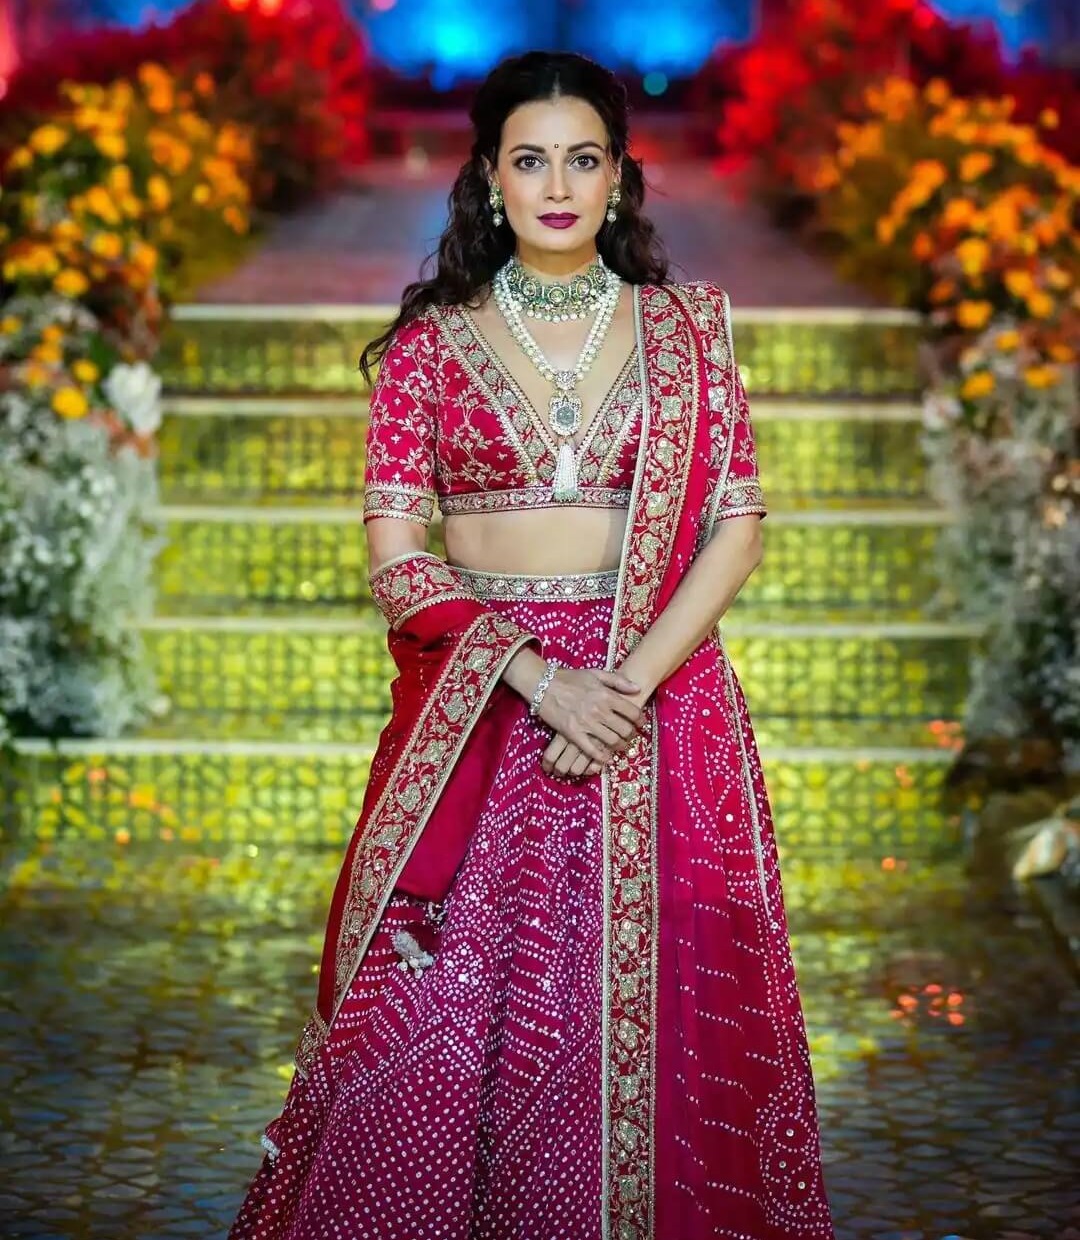 Dia Mirza Looks Bold, Elegant, And Graceful In The Vibrant Red Color Lehenga Set